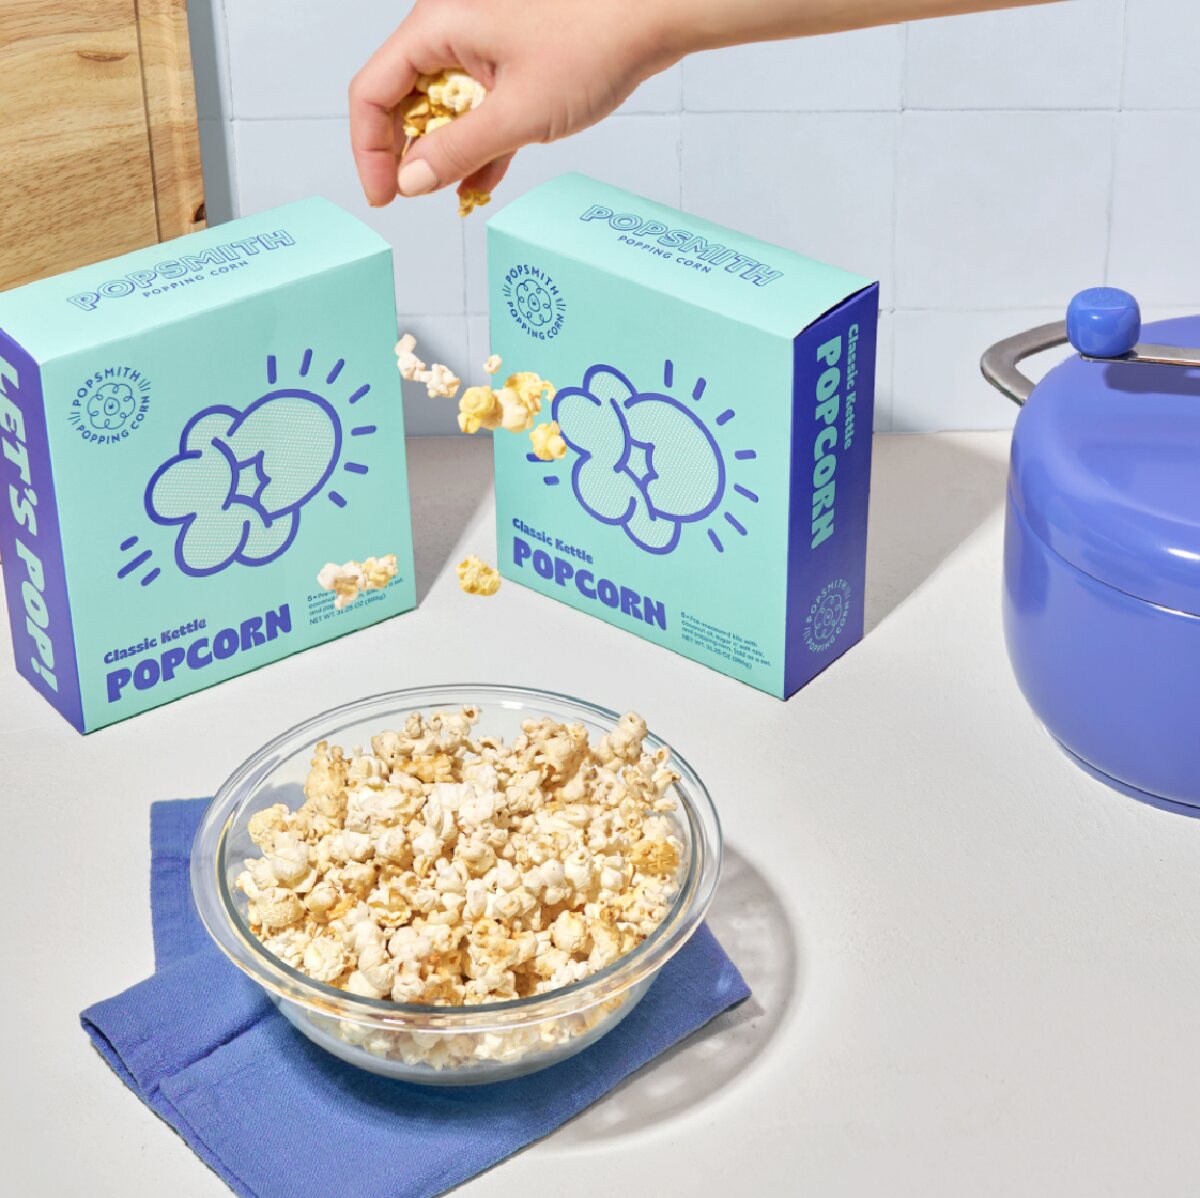 Two blue and purple boxes of Popsmith popcorn next to a purple popcorn popper and a bowl of prepared popcorn on blue napkins. 